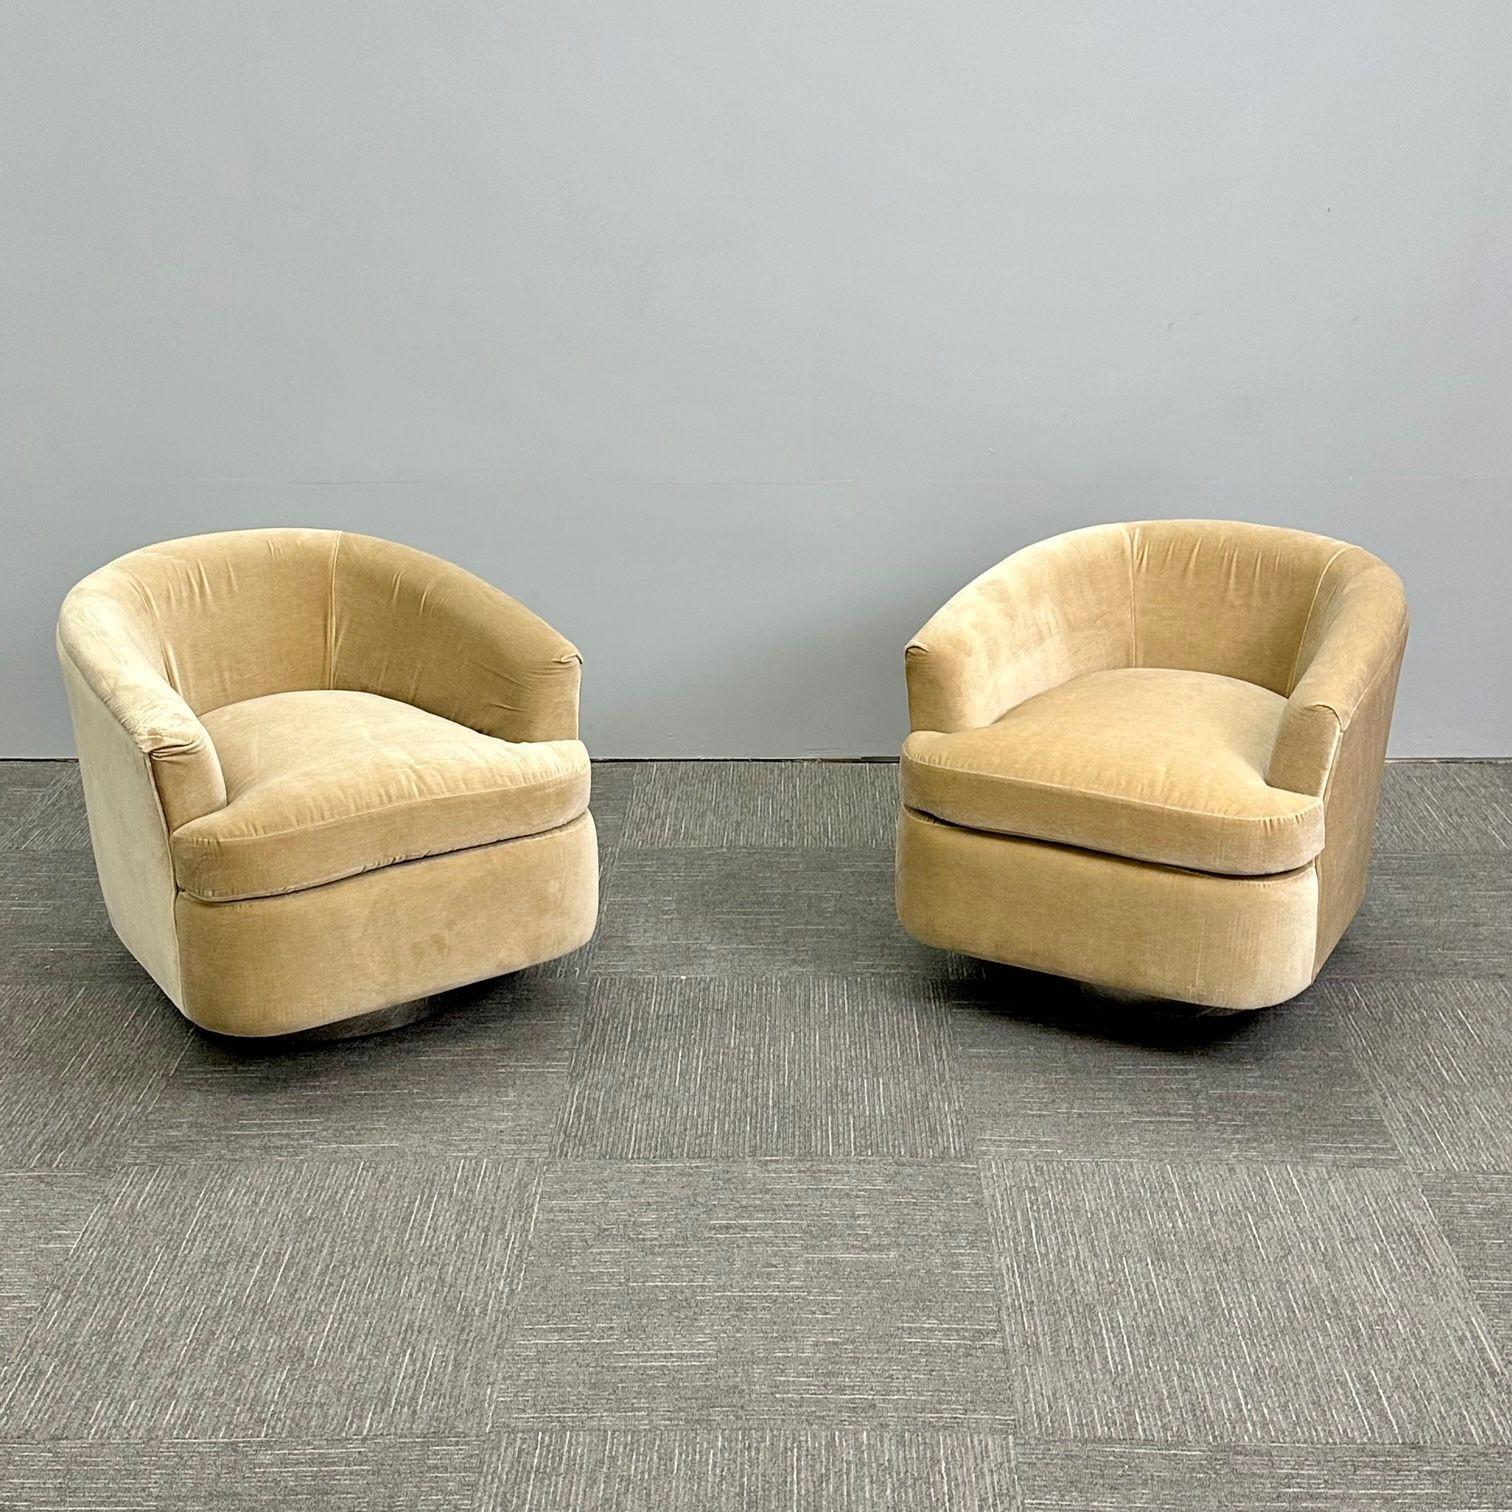 Mid-Century Modern Milo Baughman Style Swivel Chairs, Chrome Base, Tan Mohair In Excellent Condition For Sale In Stamford, CT